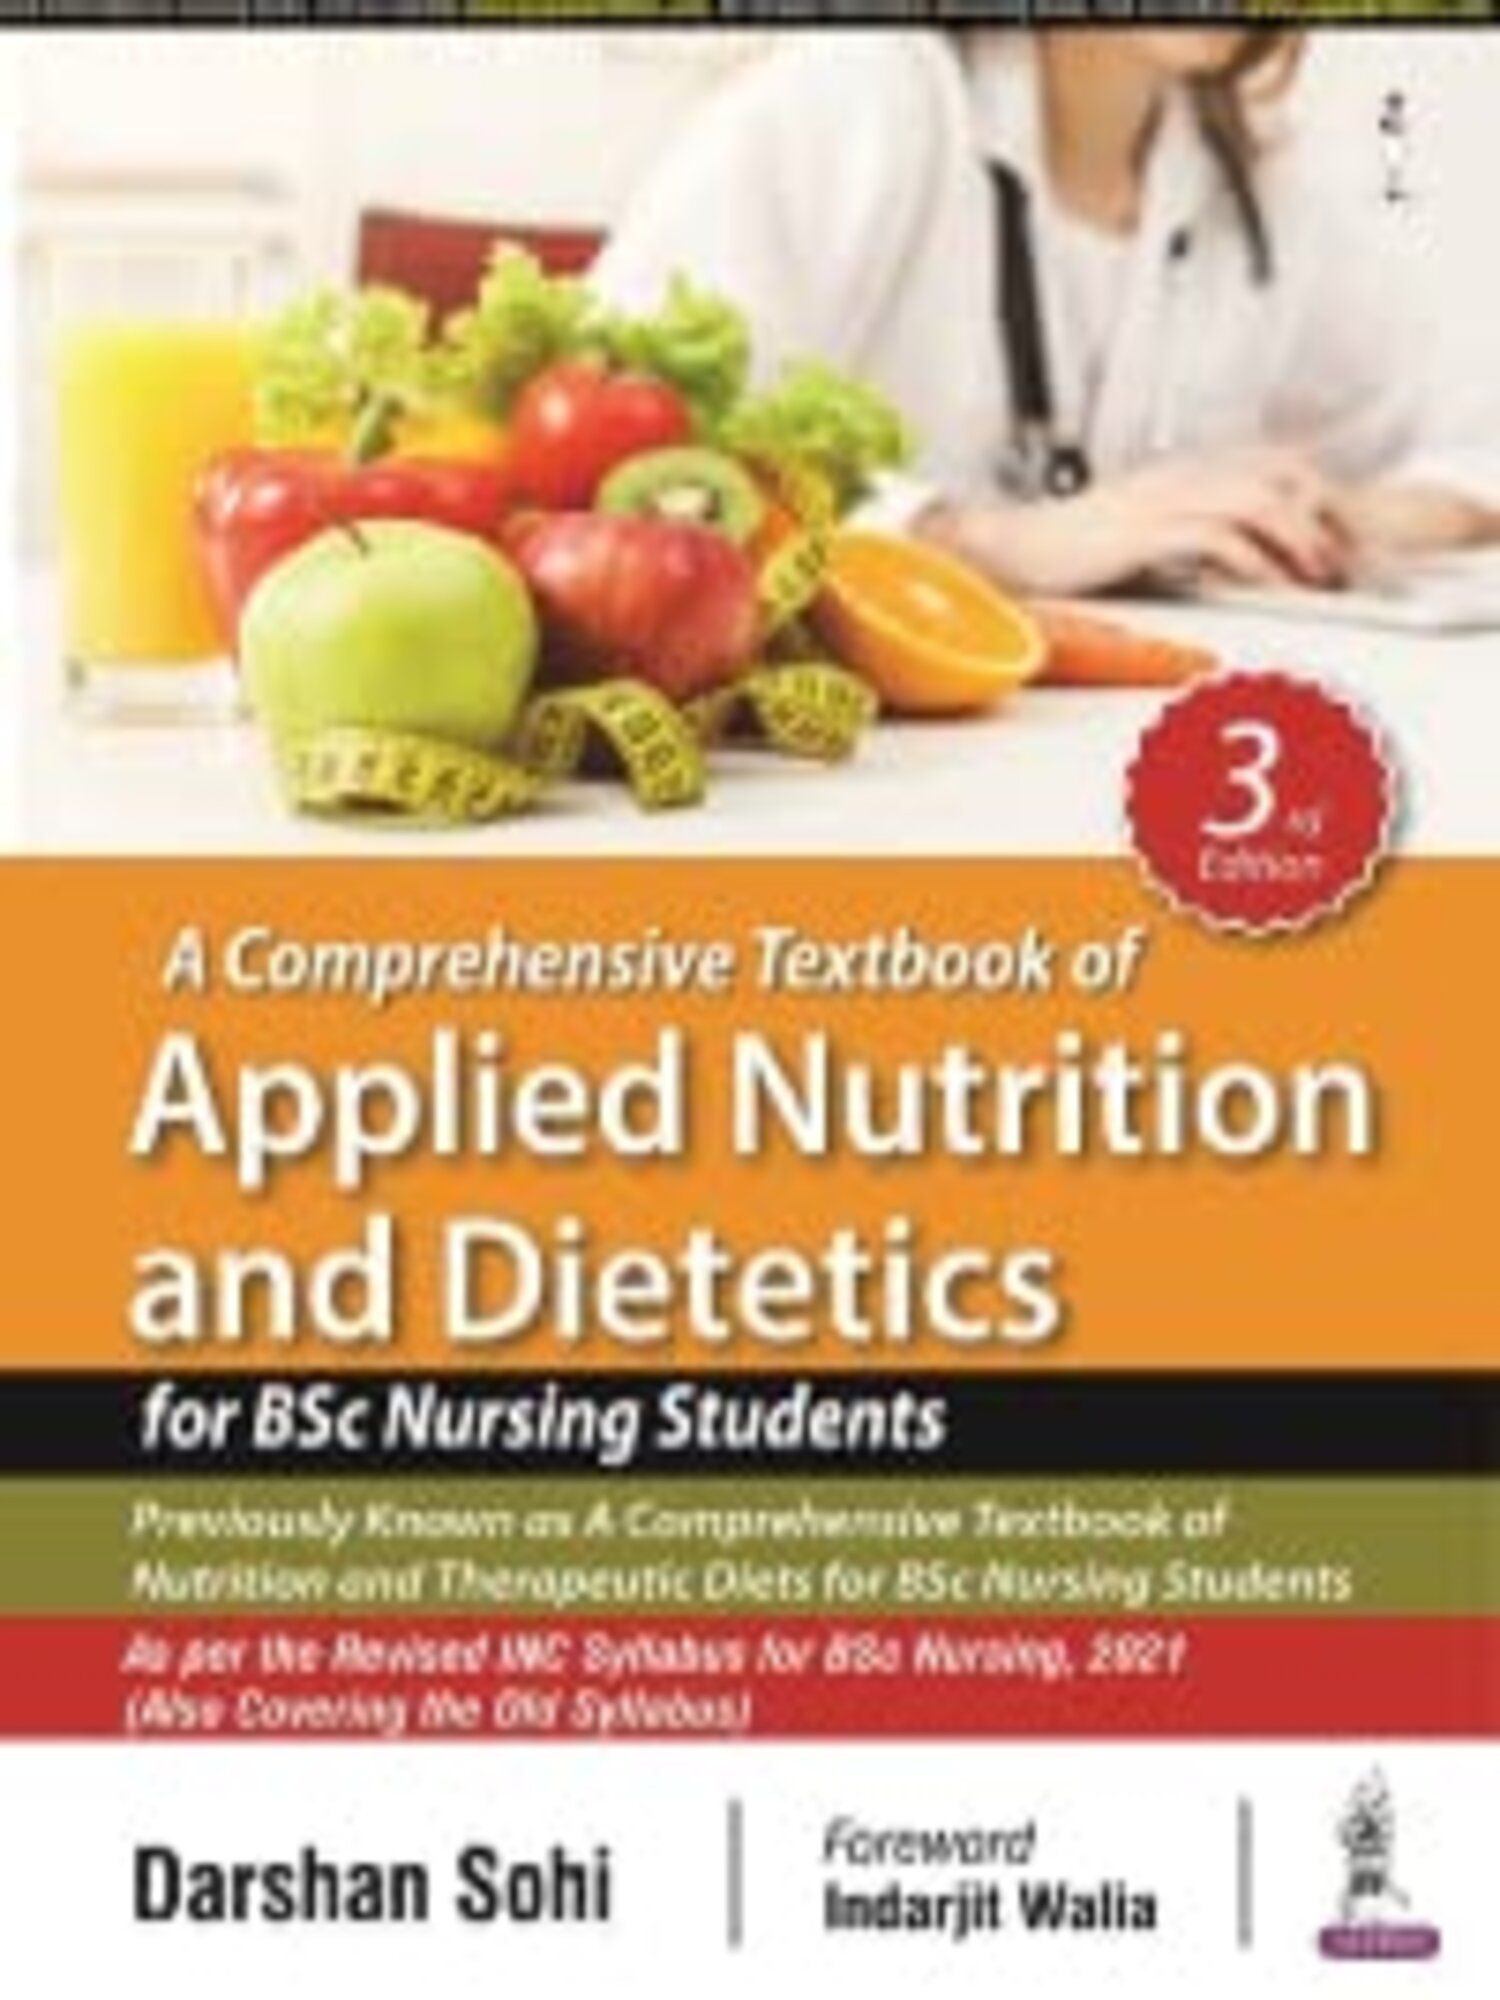     			A Comprehensive Textbook of Applied Nutrition and Dietetics for BSc Nursing Students by Darshan Sohi (3rd edition)